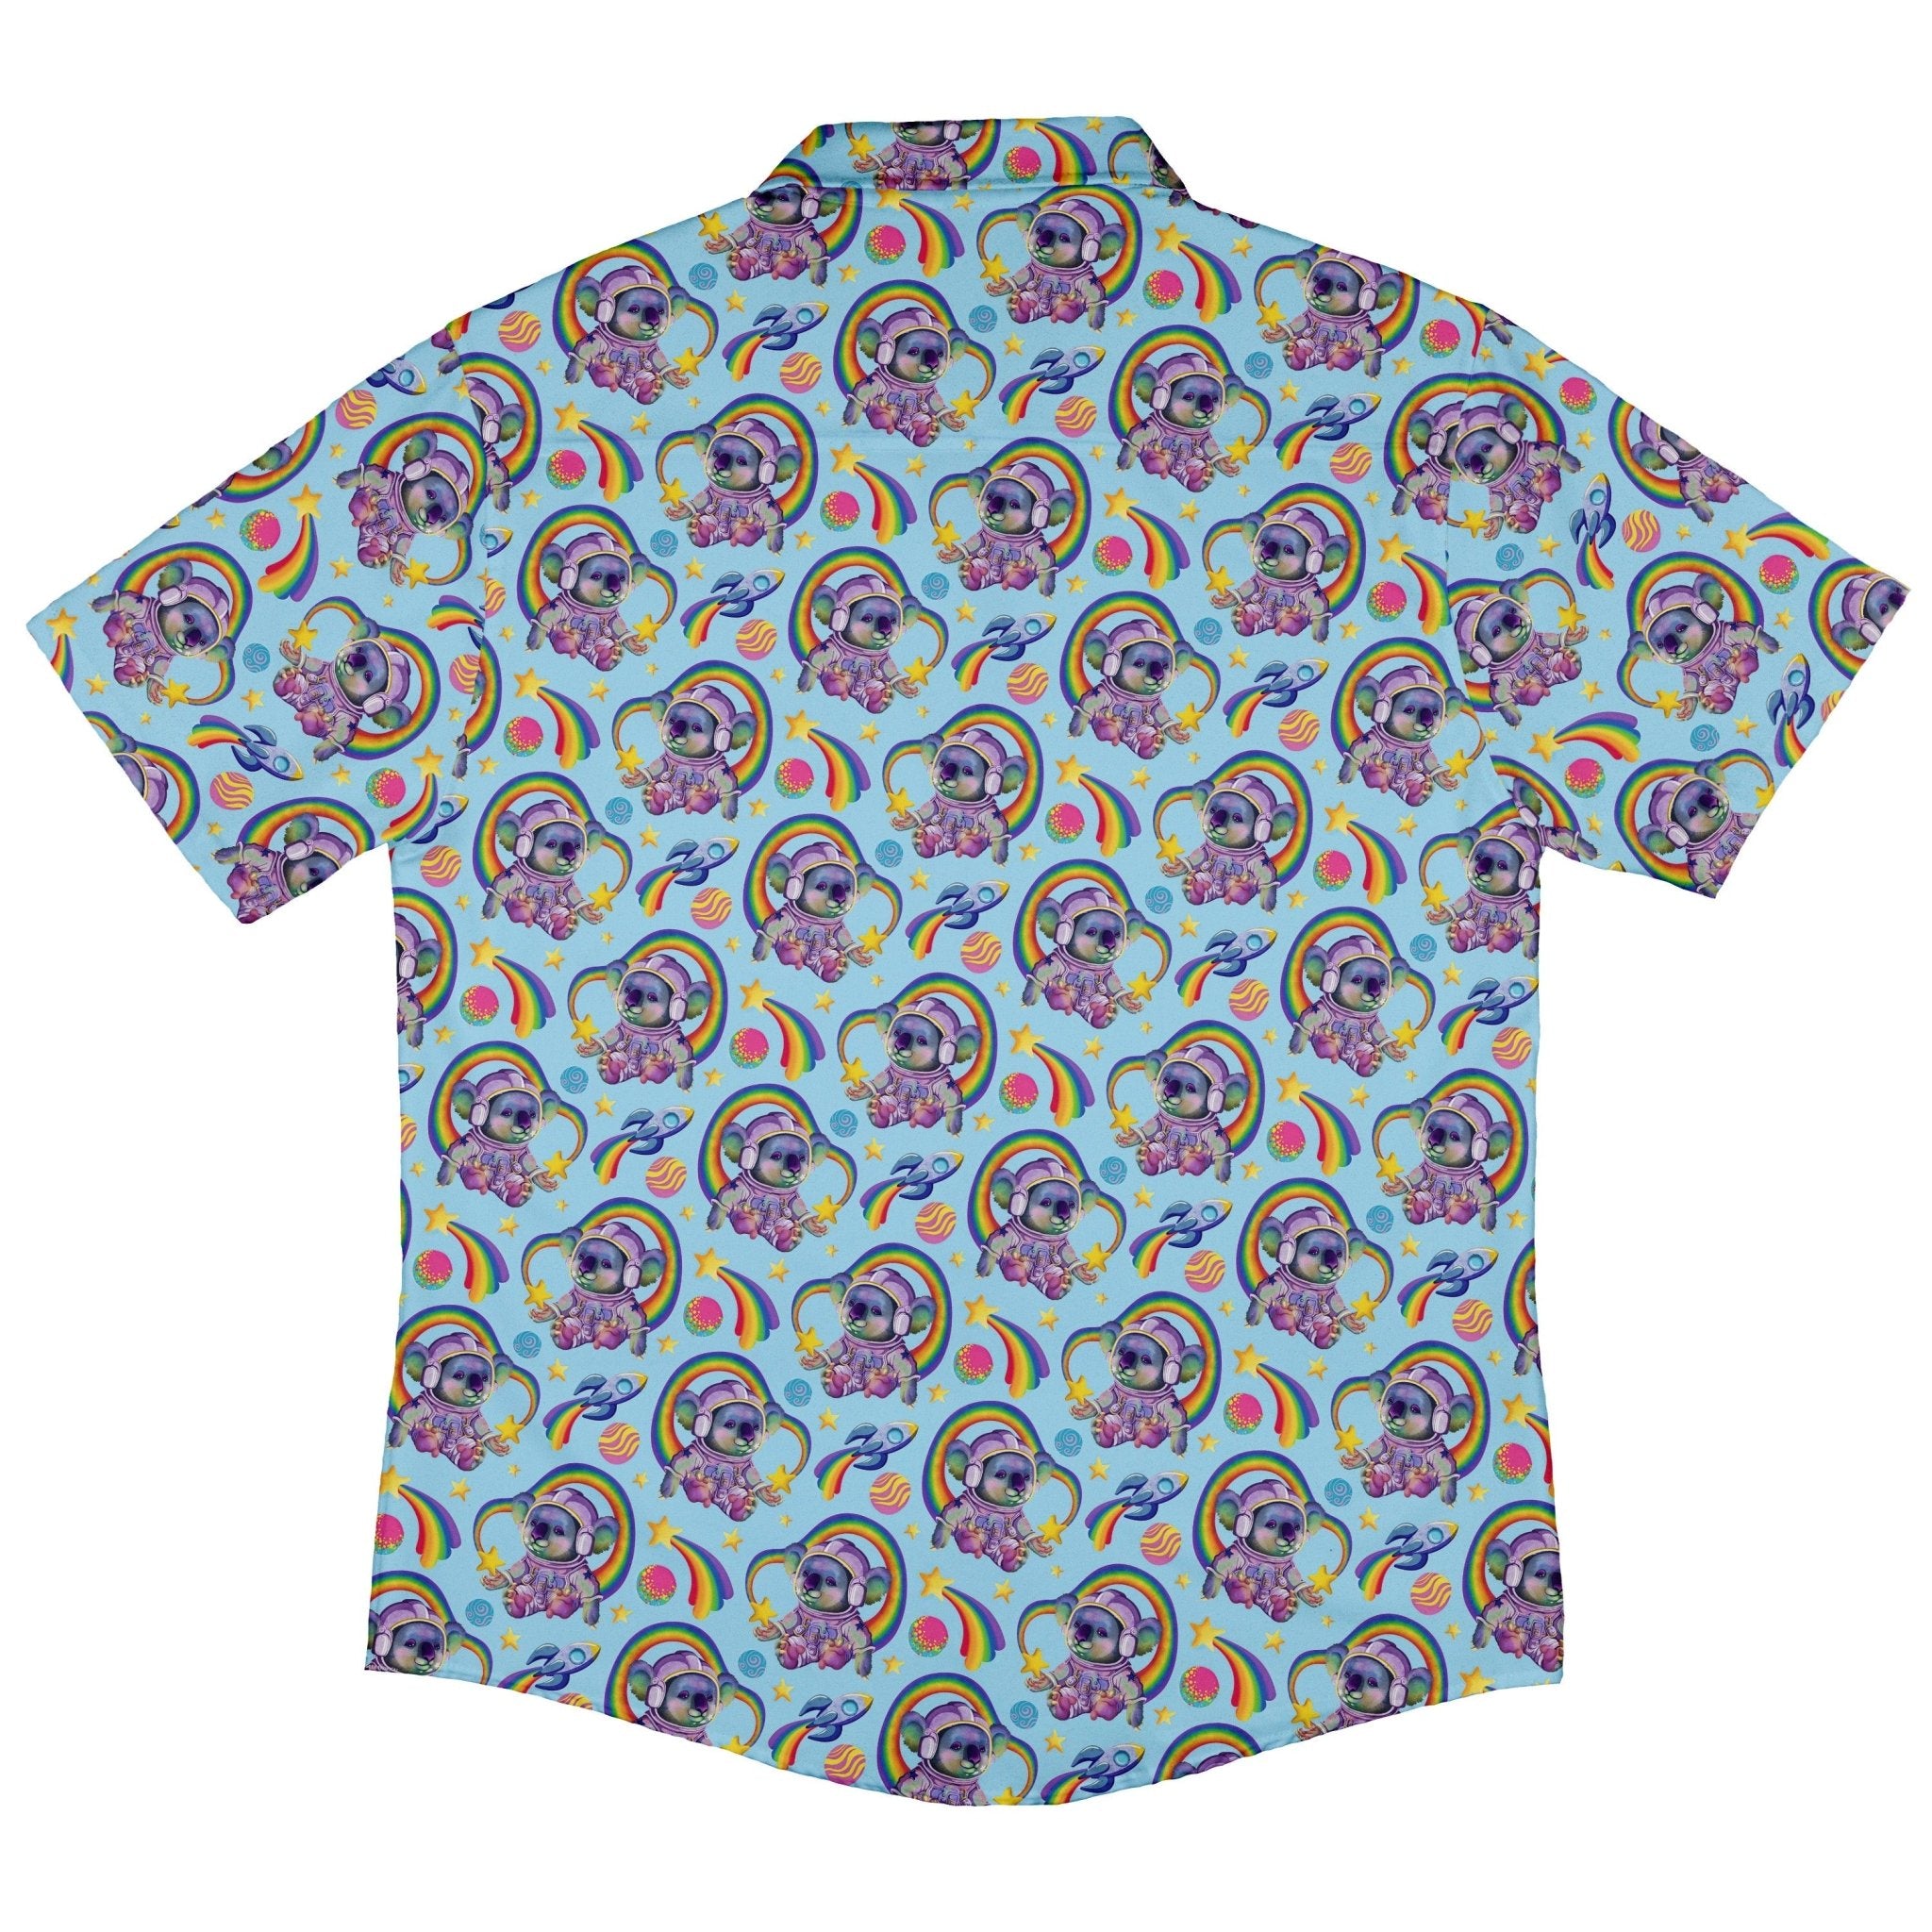 Space Koala Button Up Shirt - adult sizing - Animal Patterns - Design by Carla Morrow